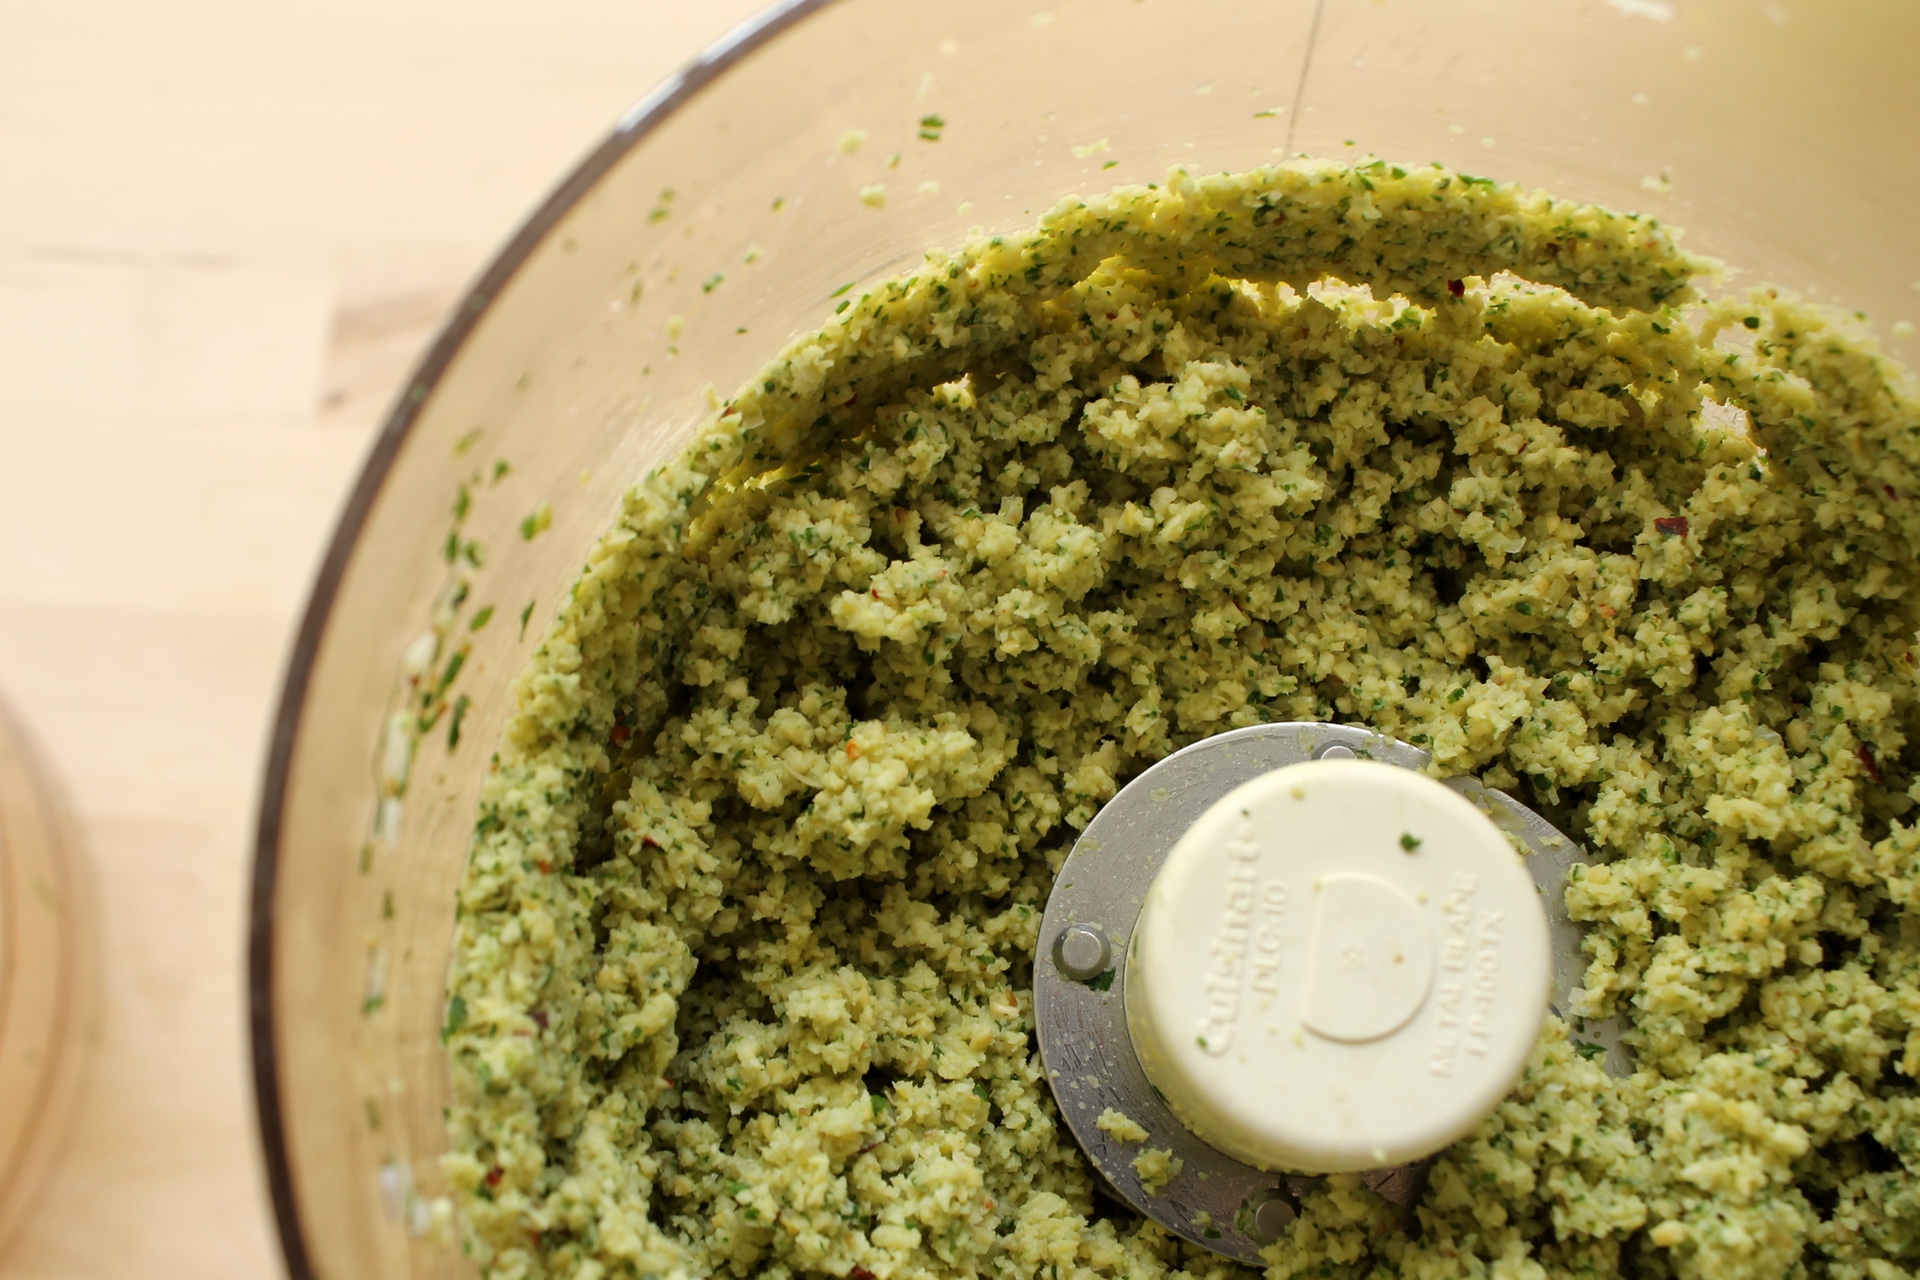 The processed falafel mixture should be a coarse paste. You want it to stick together, but you also want to have small pieces of chickpeas throughout.